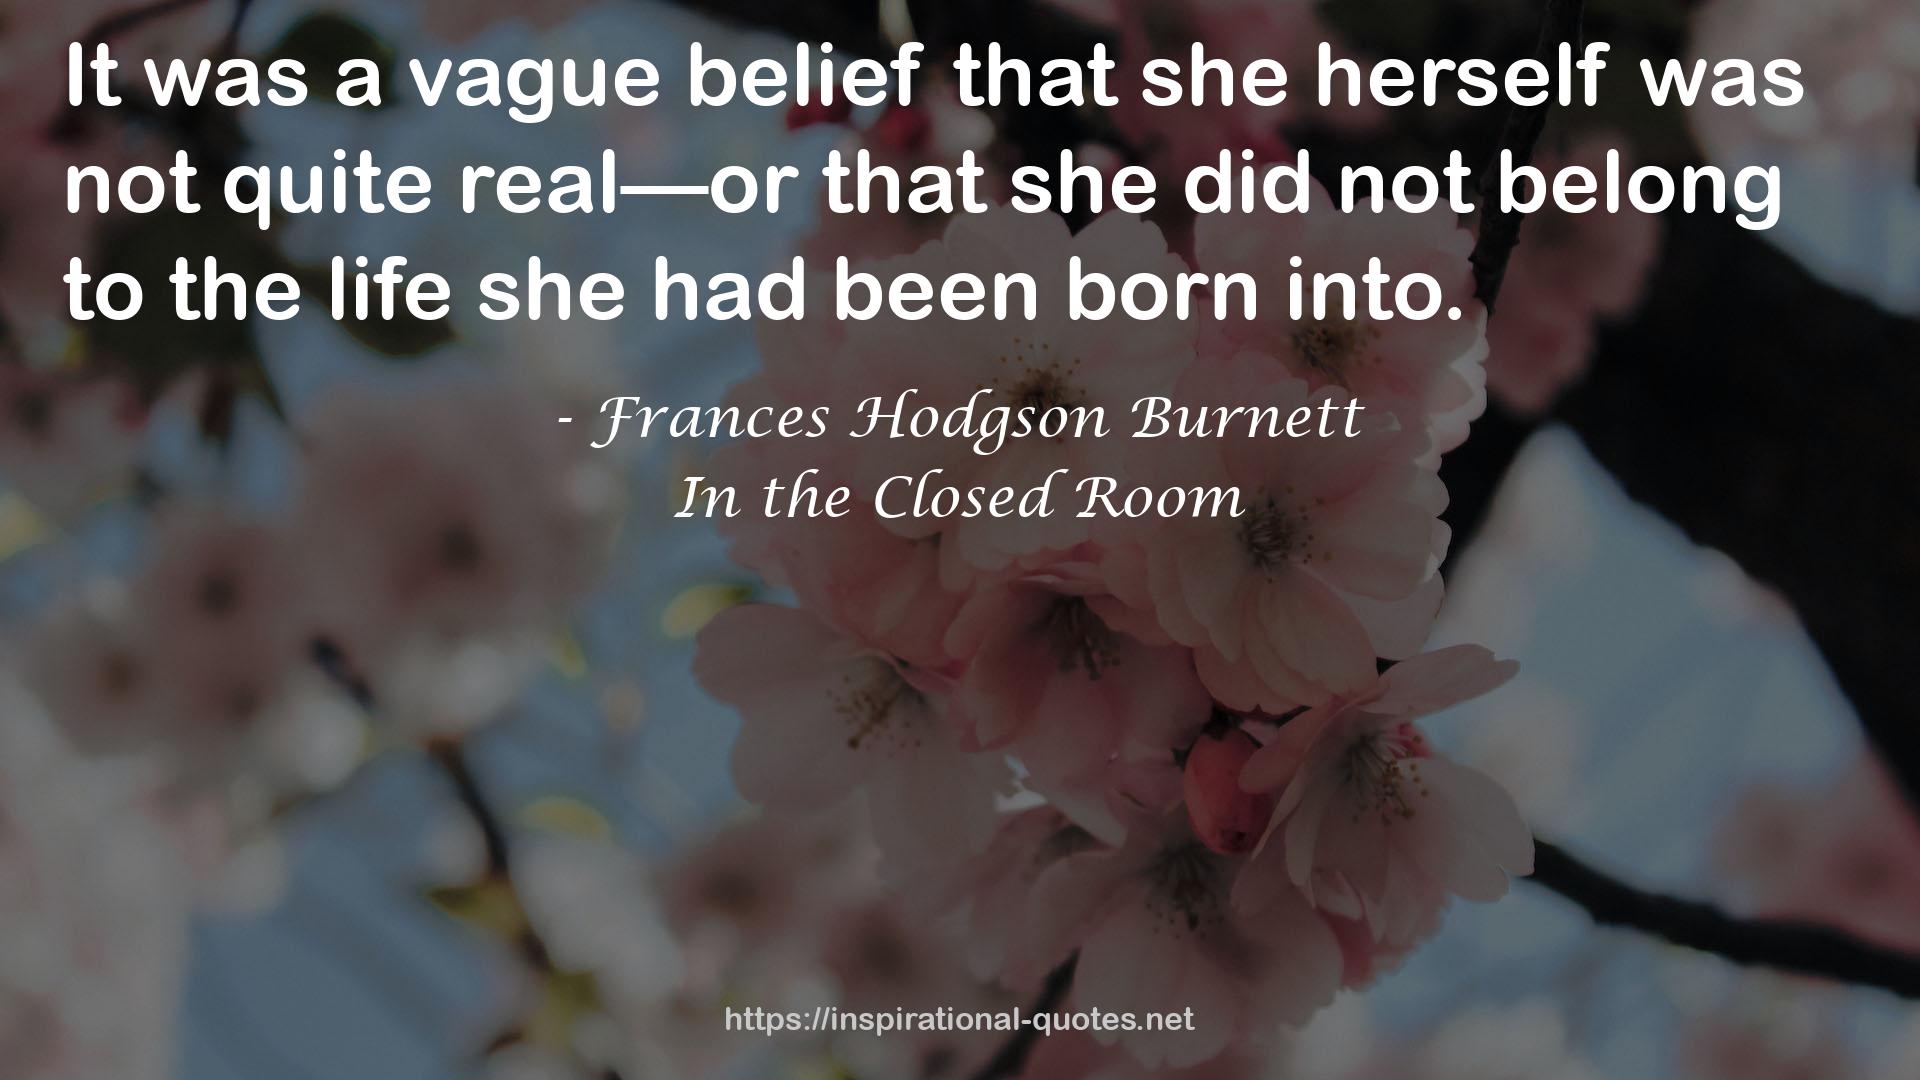 In the Closed Room QUOTES